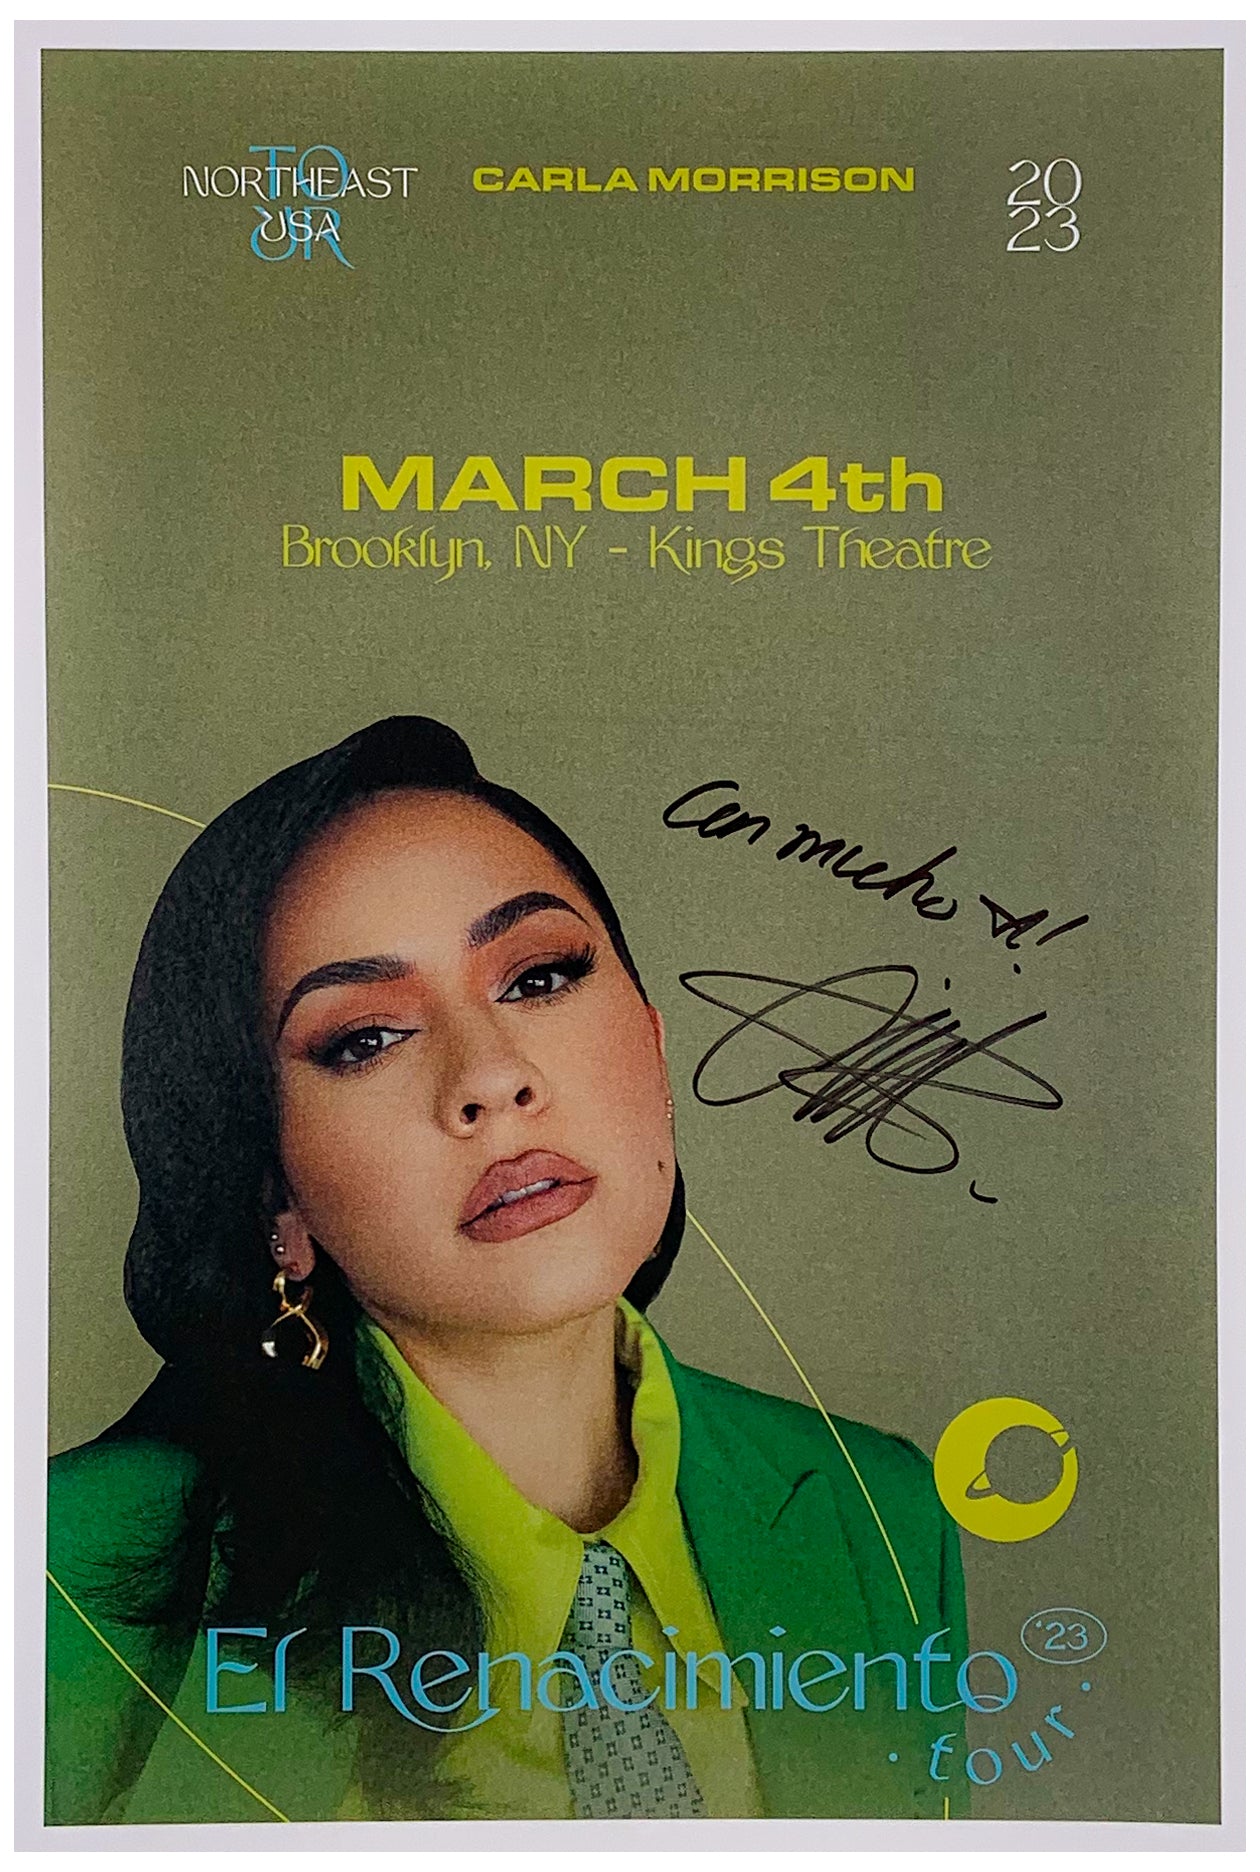 Carla Morrison Autograph Poster from Kings Theatre in Brooklyn NY